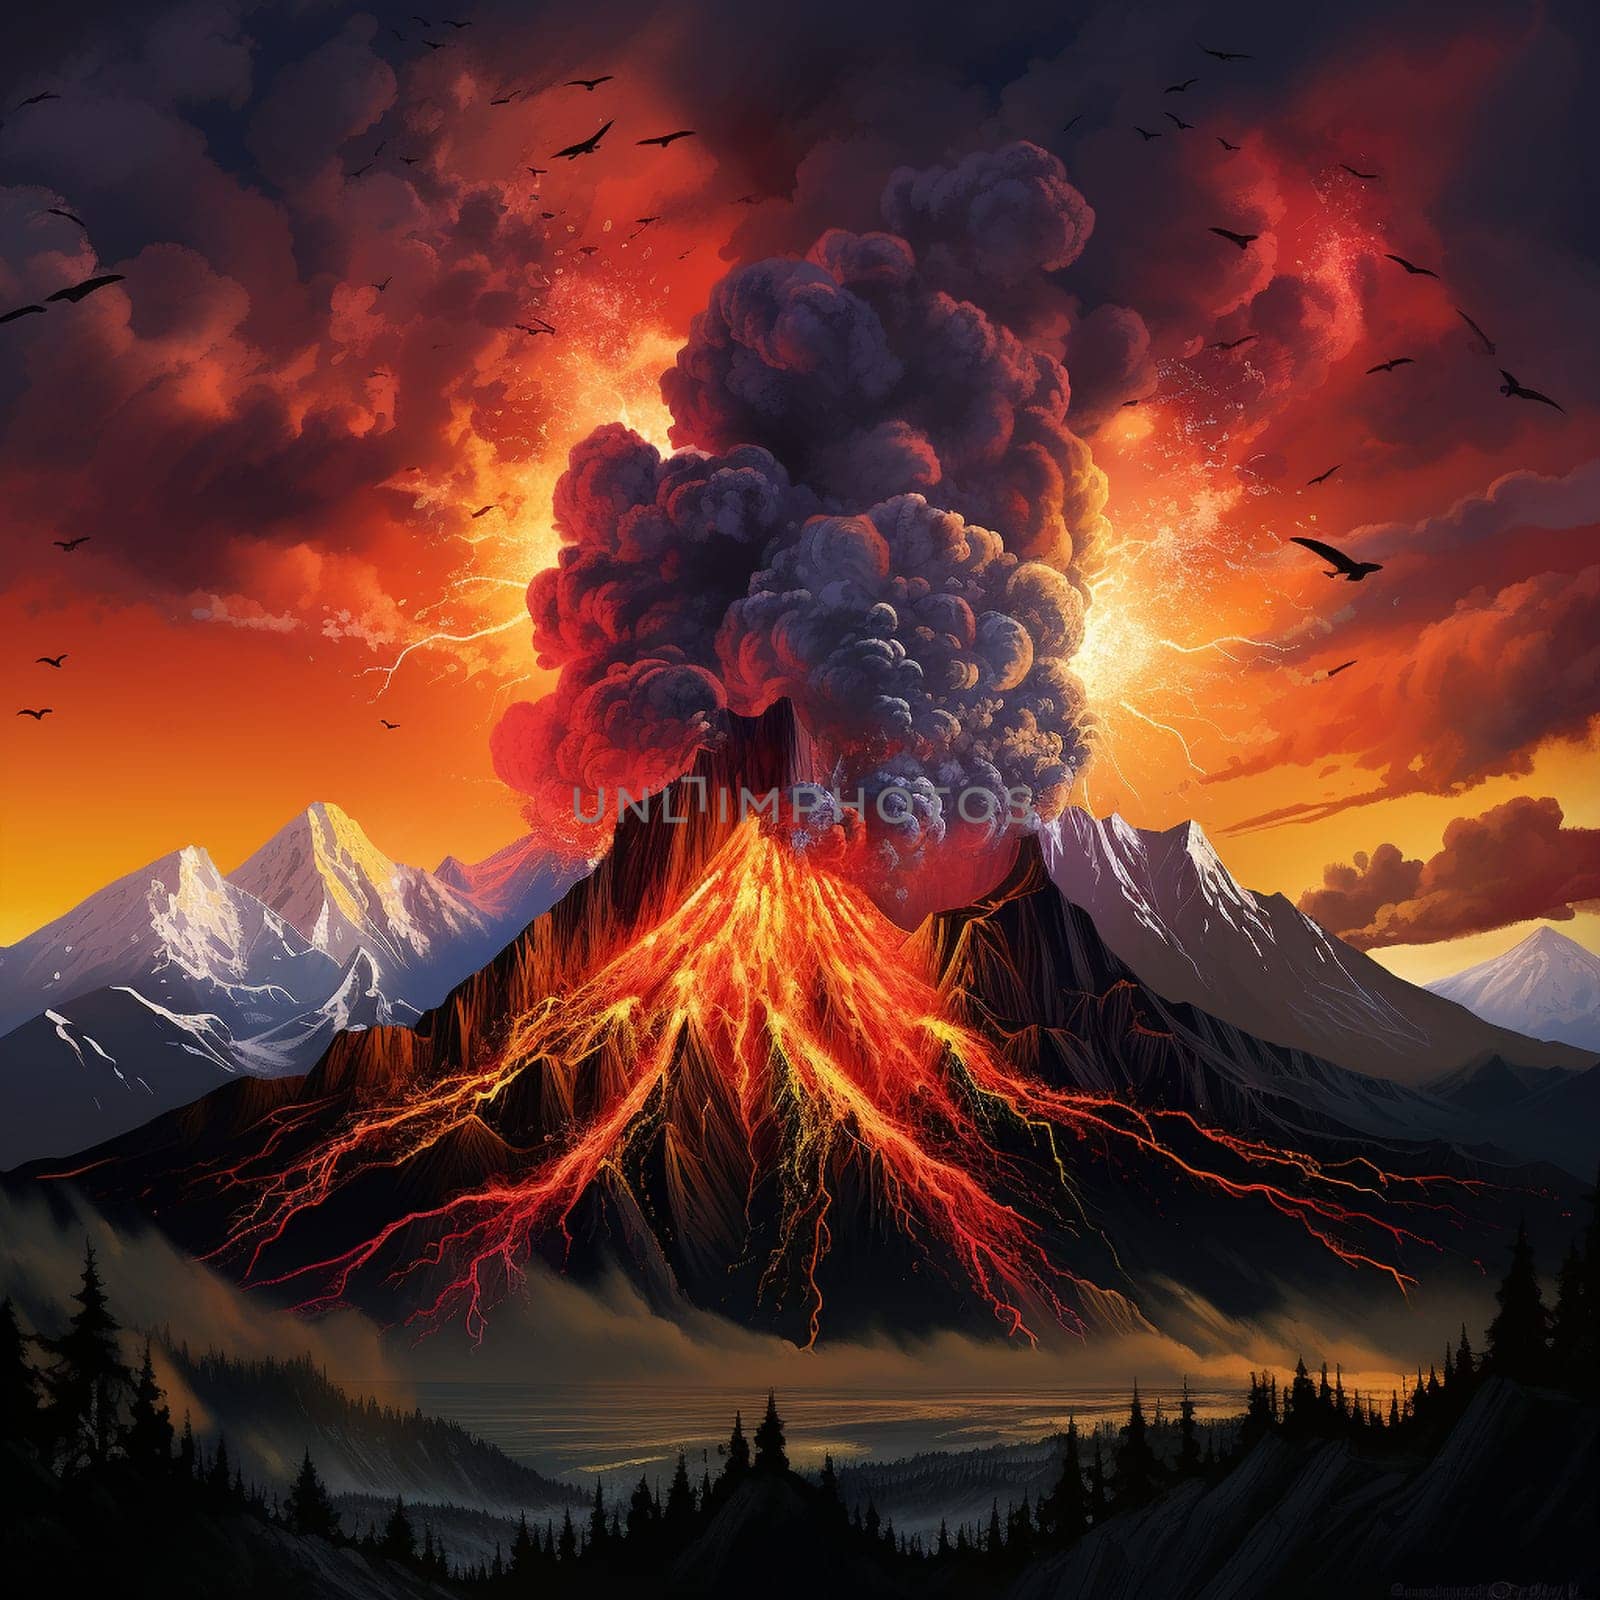 Experience the raw power and intensity of a volcanic eruption in this vibrant and captivating digital illustration. Titled 'Volcanic Tremor,' this artwork showcases a breathtaking scene that will surely captivate viewers. Marvel at the swirling plumes of volcanic ash, the mesmerizing sight of molten lava cascading down the slopes, and the fiery explosions that light up the sky. This image perfectly captures the destructive force and awe-inspiring beauty of nature's fiery display. The contrast between the dark, rugged landscape and the fiery eruption adds another layer of visual impact.